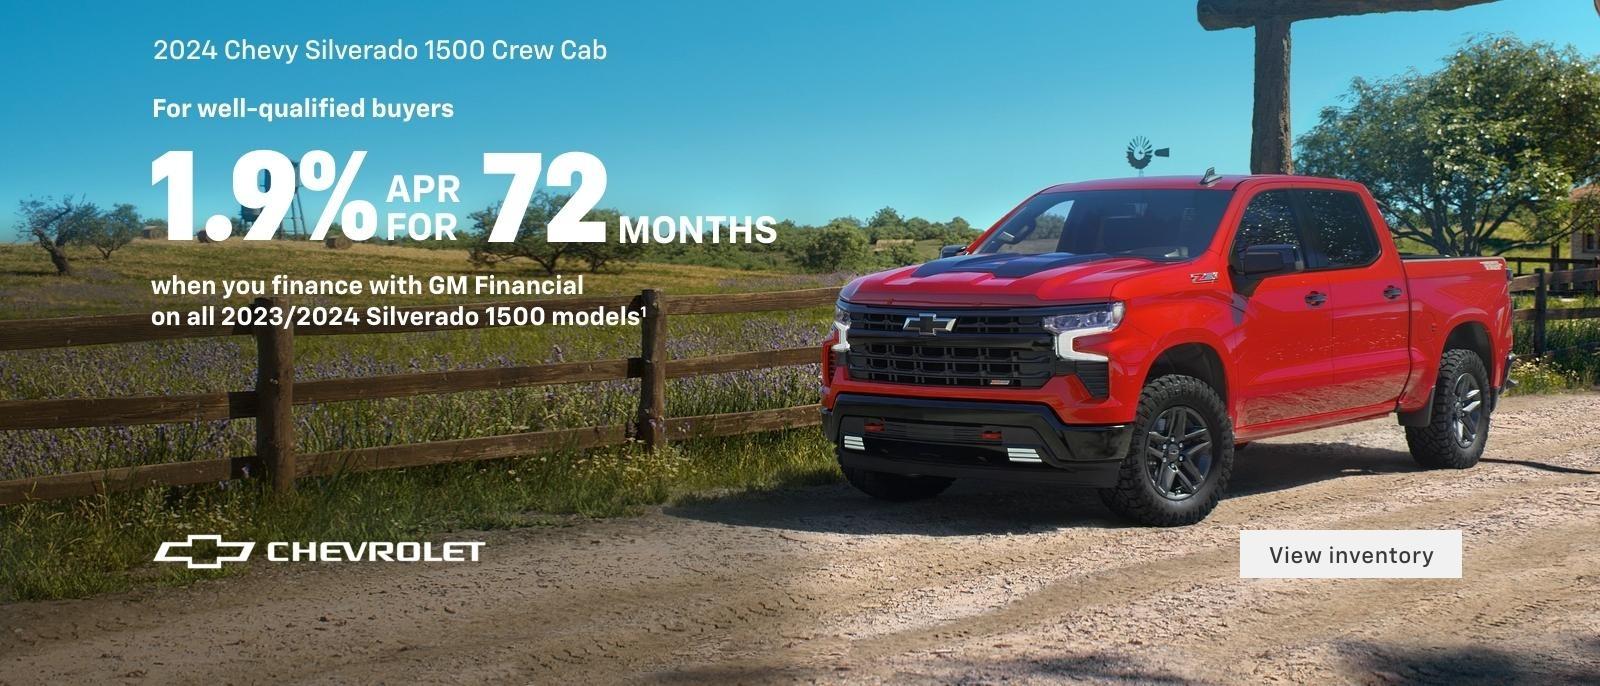 2024 Silverado 1500. For well-qualified buyers 1.9% APR for 72 months when you finance with GM Financial.